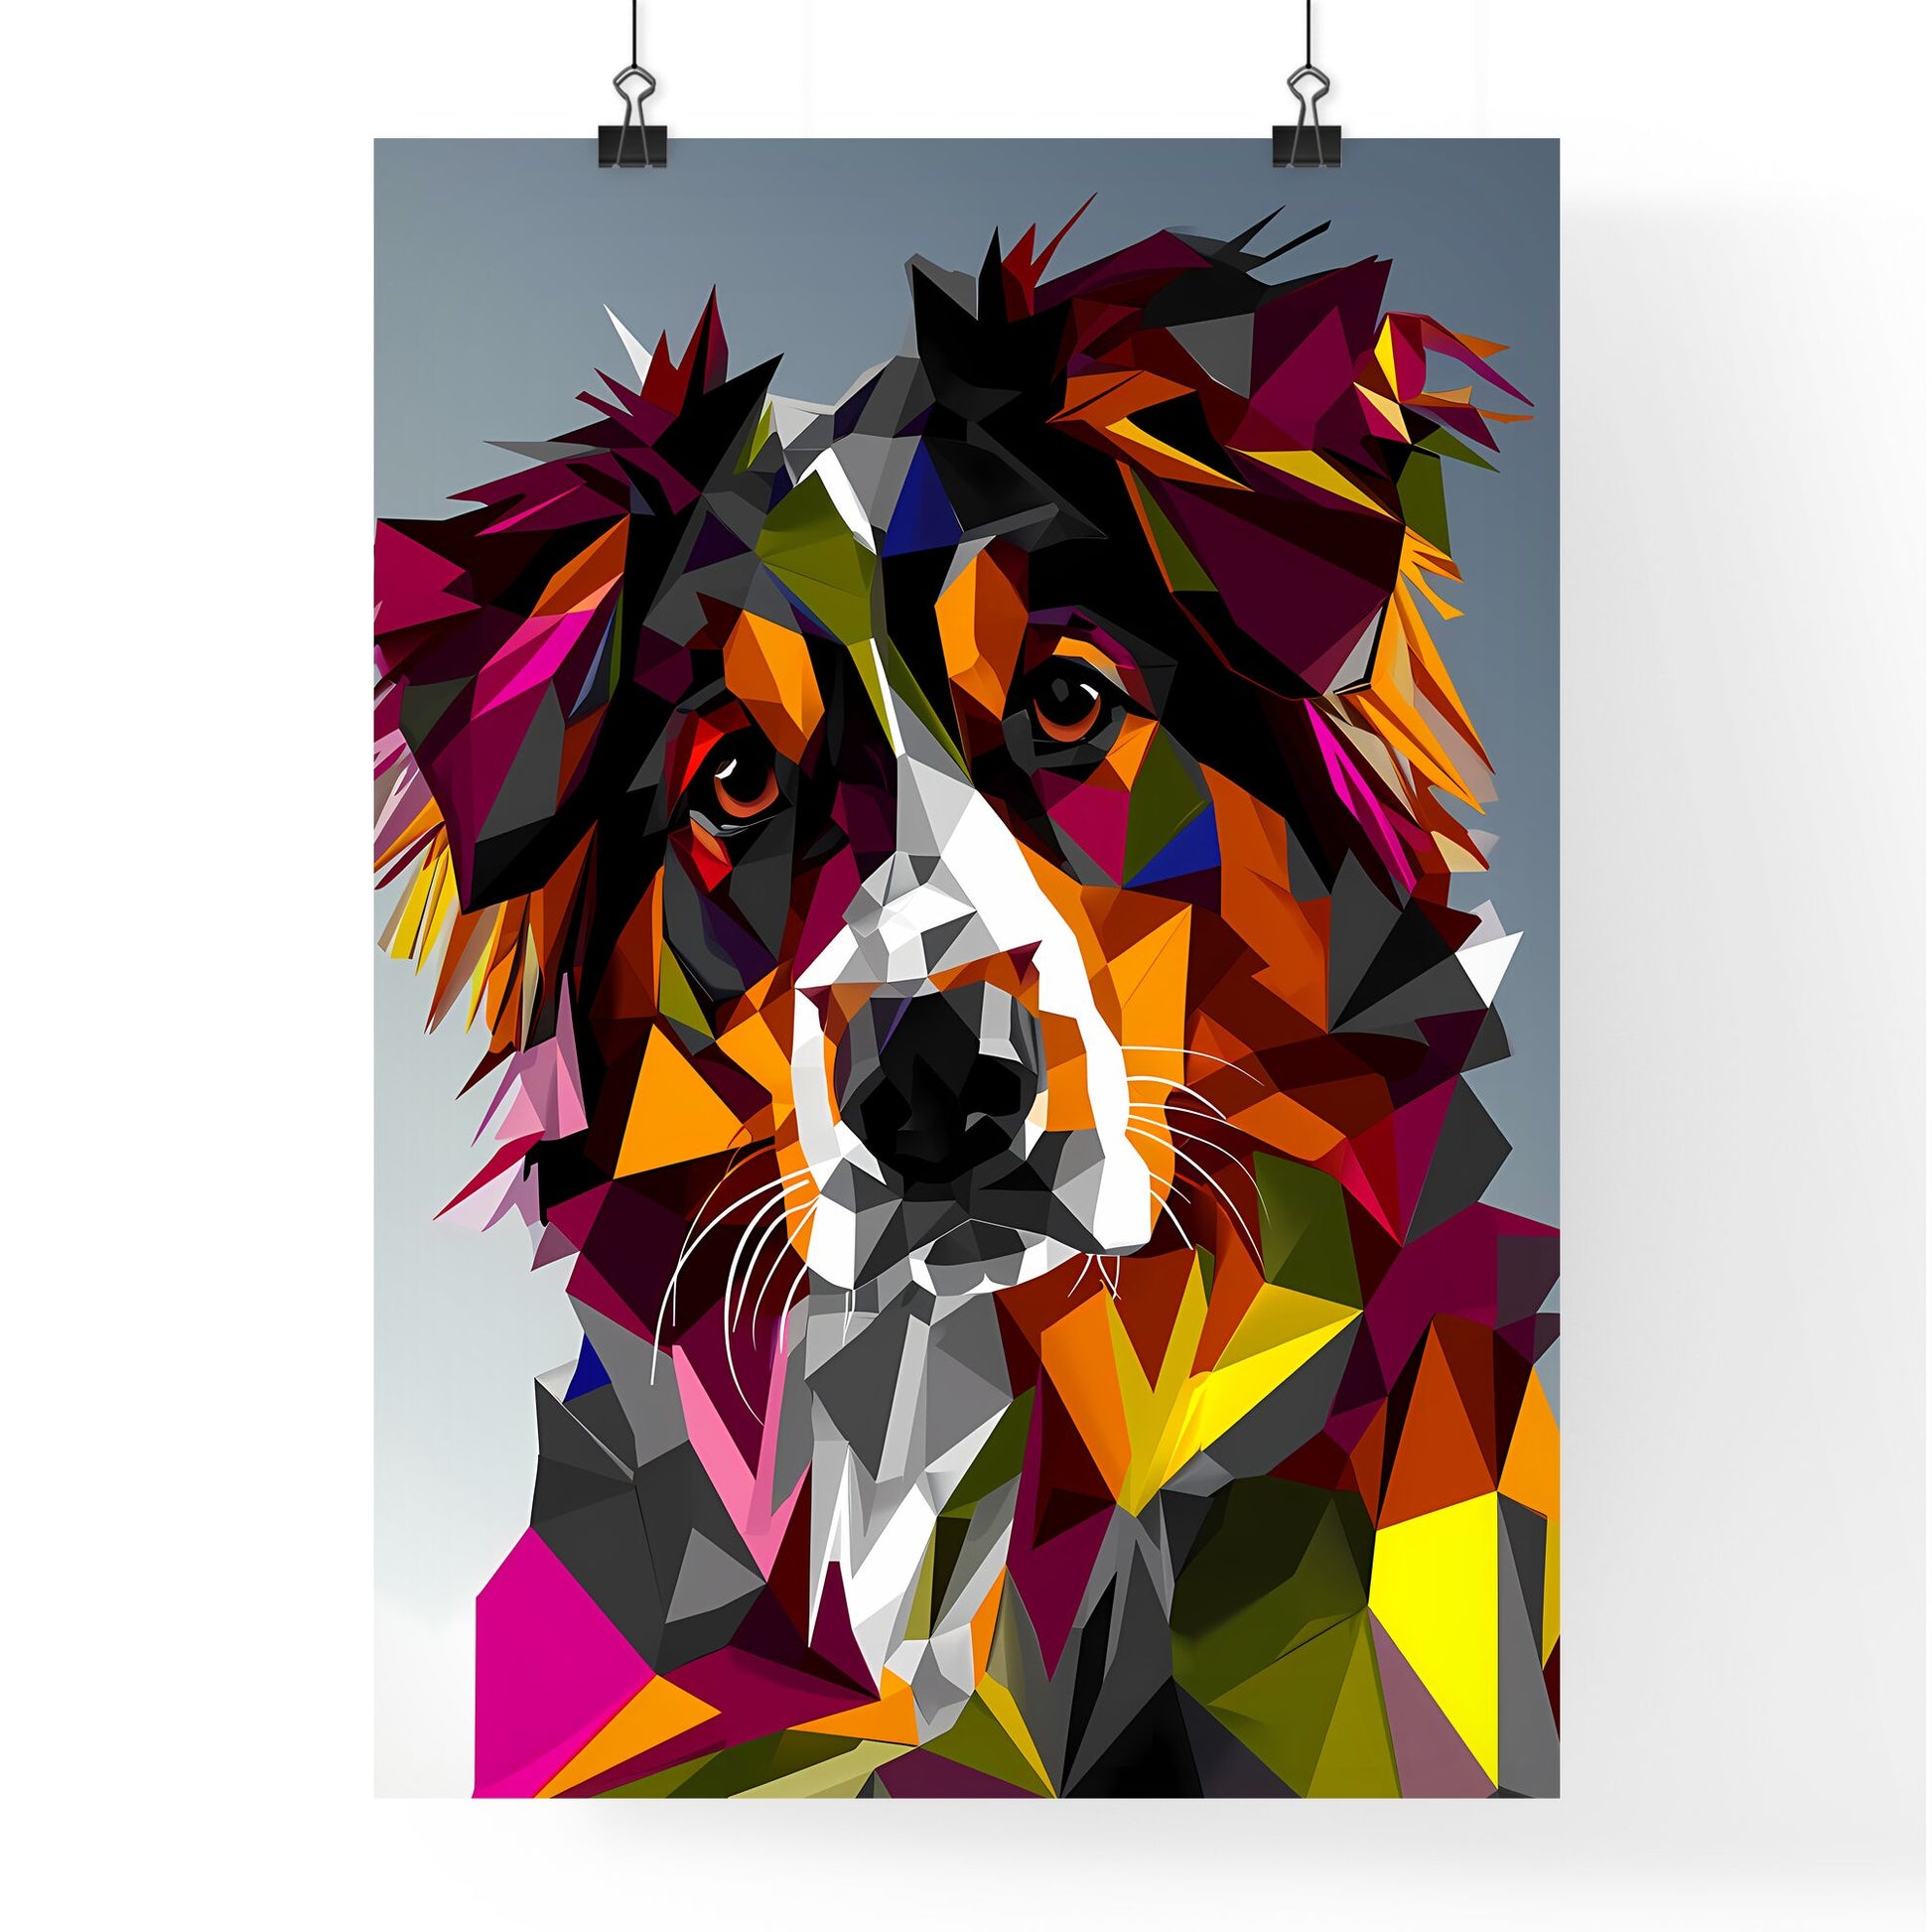 A Poster of two dogs holding each other - A Colorful Dog With White And Black Face Default Title